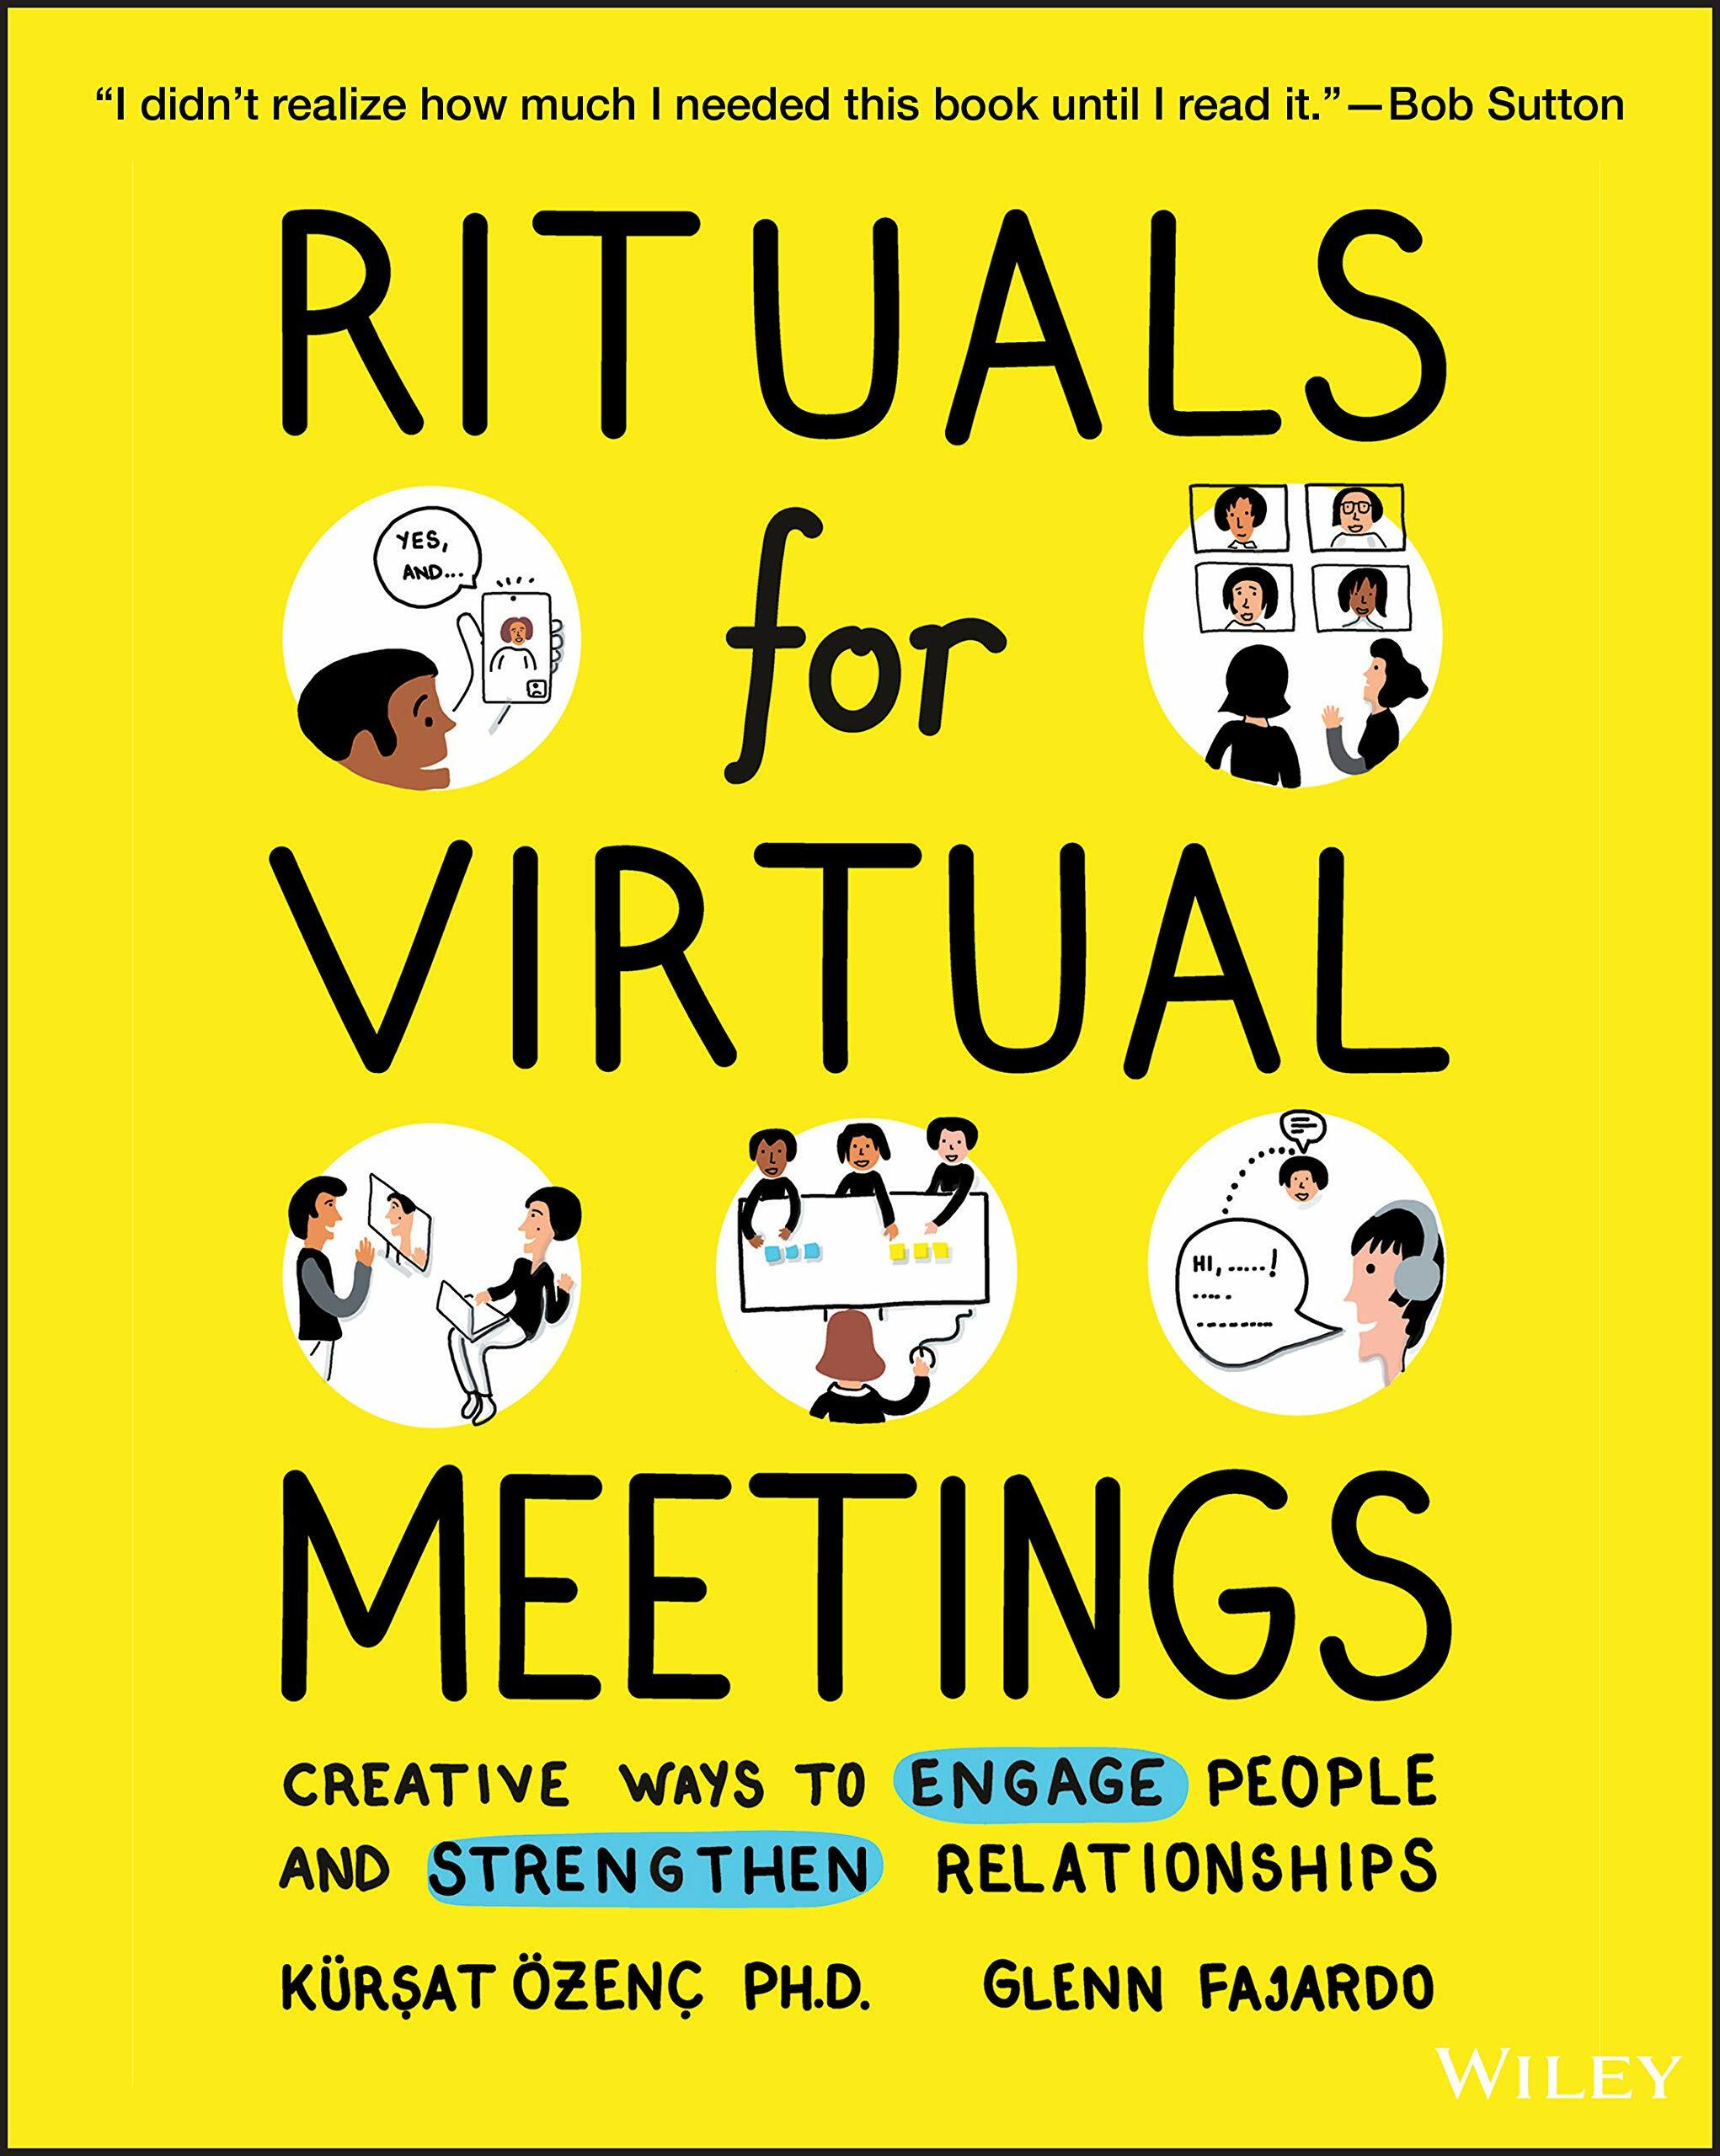 Rituals for Virtual Meetings: Creative Ways to Engage People and Strengthen Relationships (Paperback)